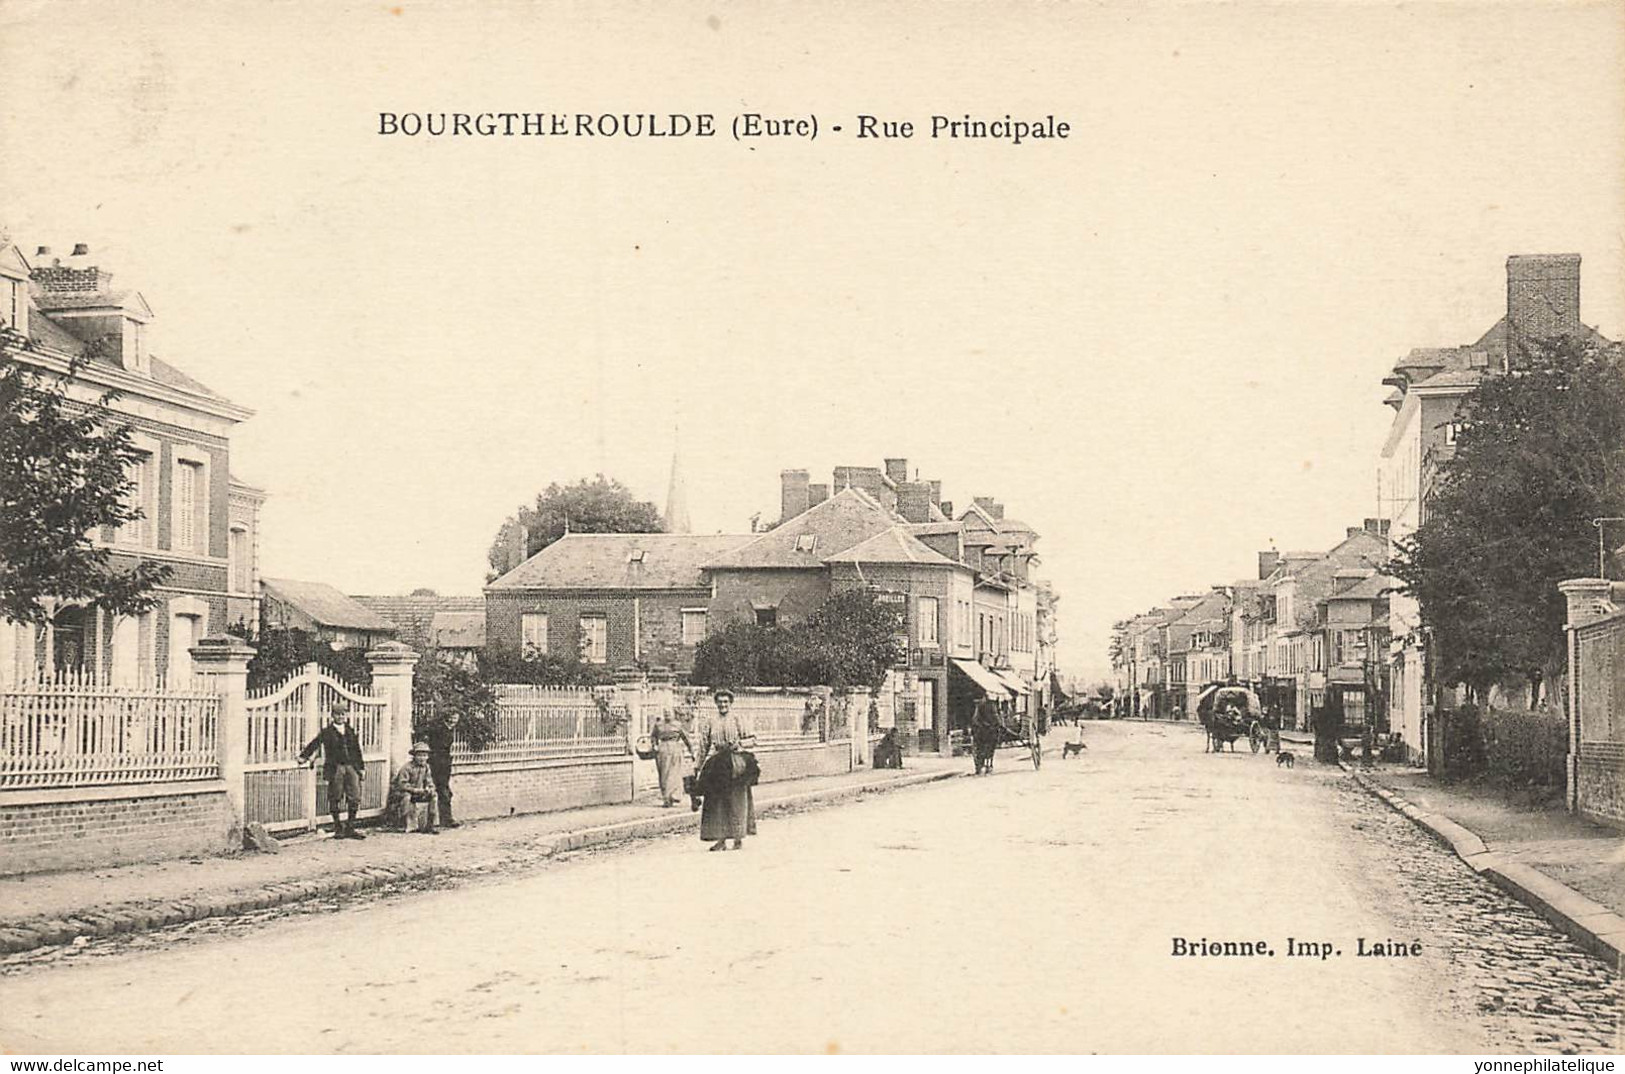 27 - EURE - BOURTHEROULDE - Rue Principale - Animation - Superbe - 10708 - Bourgtheroulde